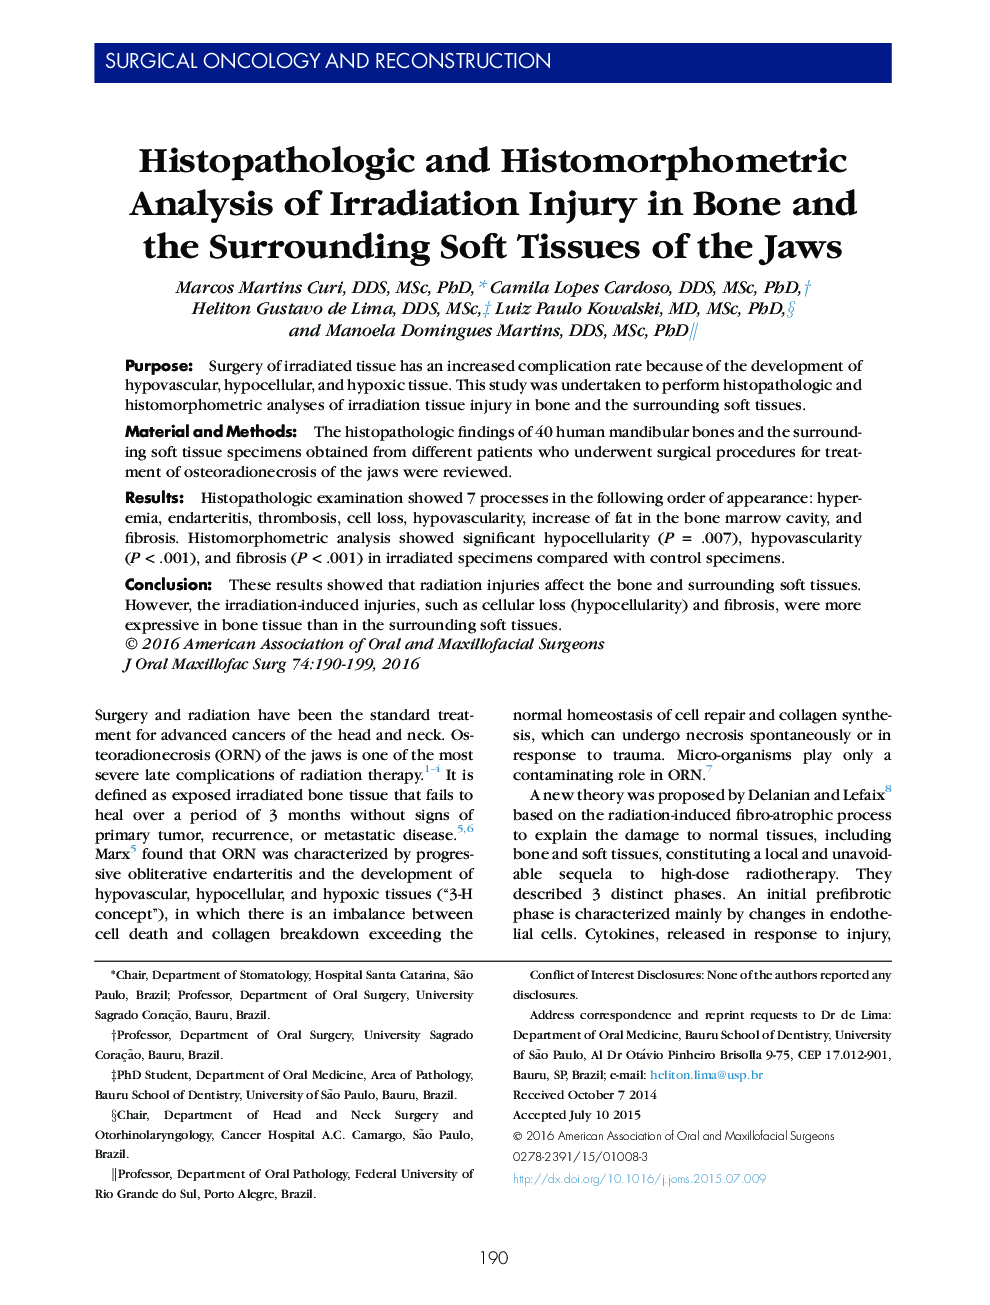 Histopathologic and Histomorphometric Analysis of Irradiation Injury in Bone and the Surrounding Soft Tissues of the Jaws 